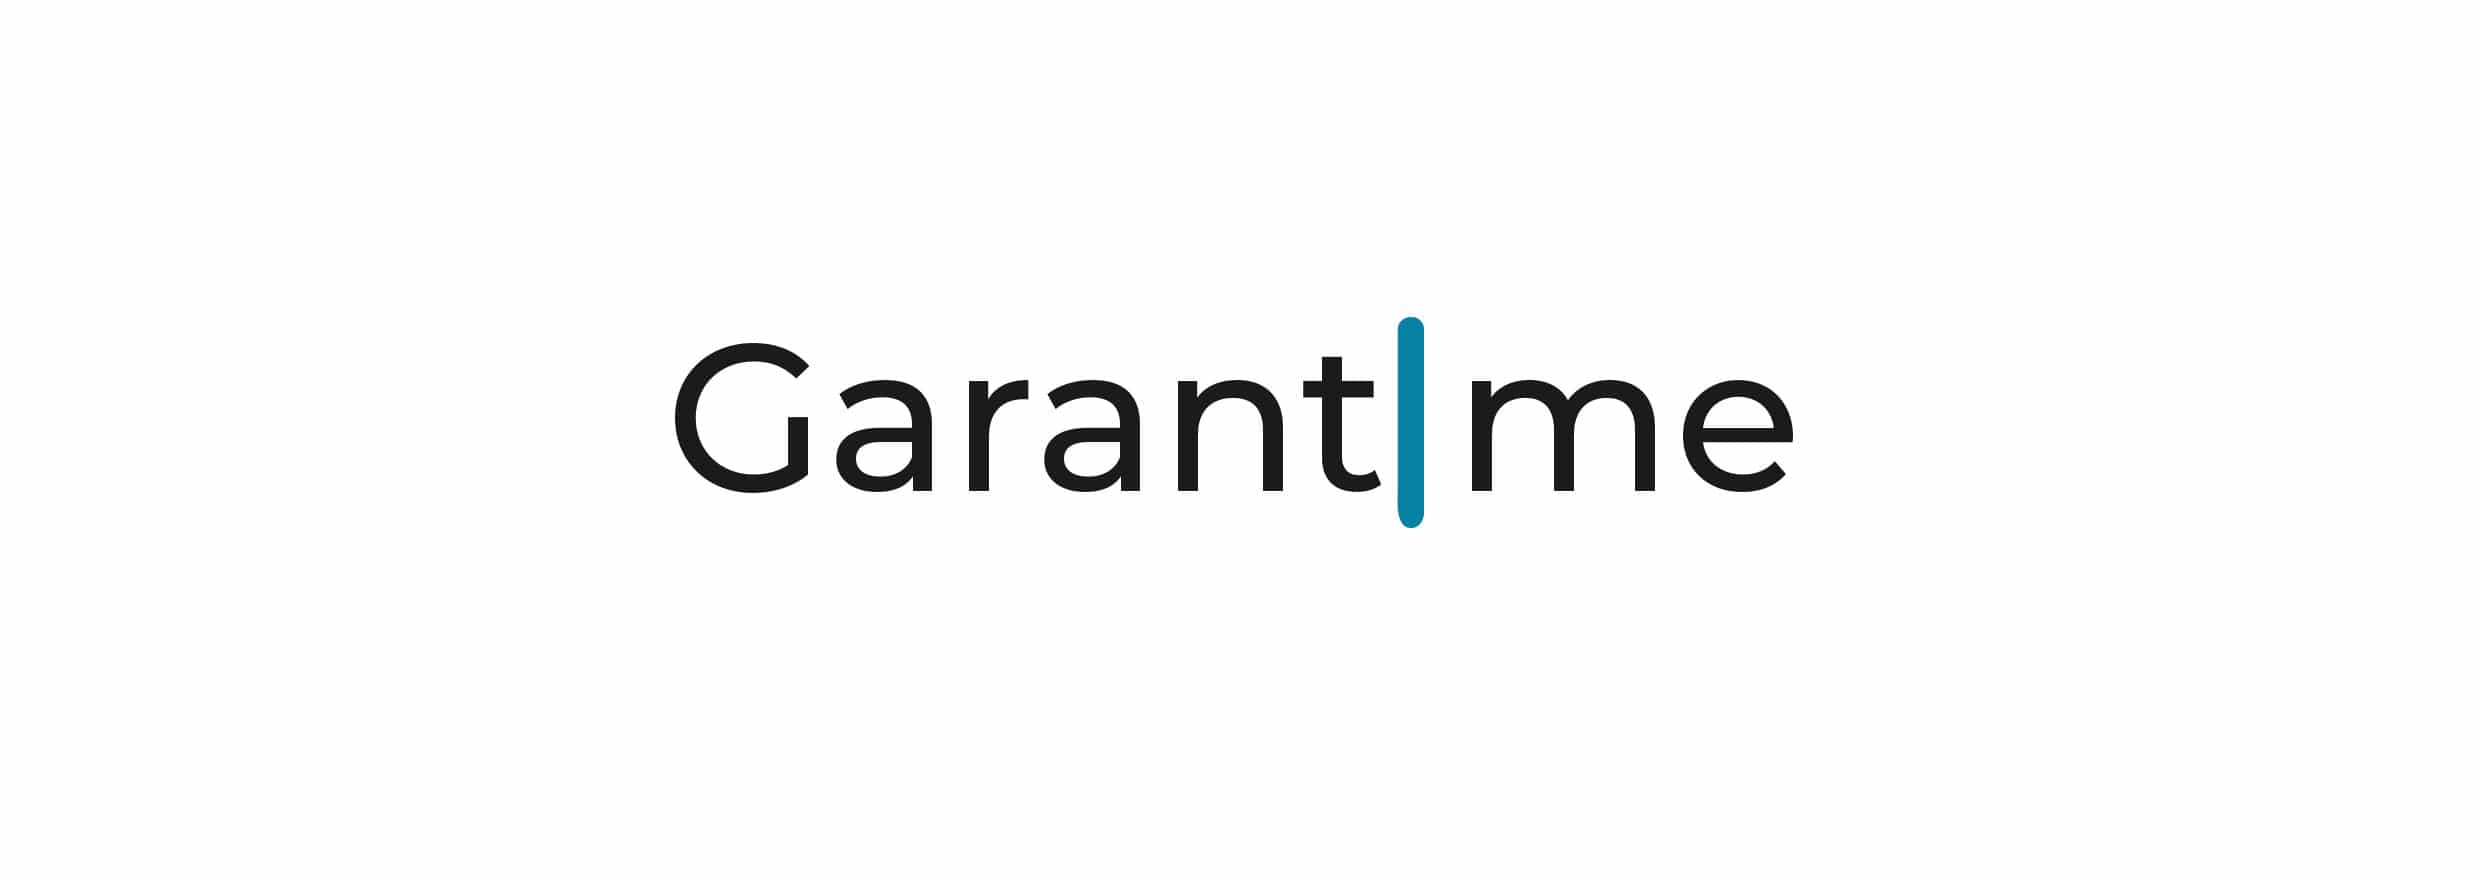 Garantme, your guarantor for an easy rent!